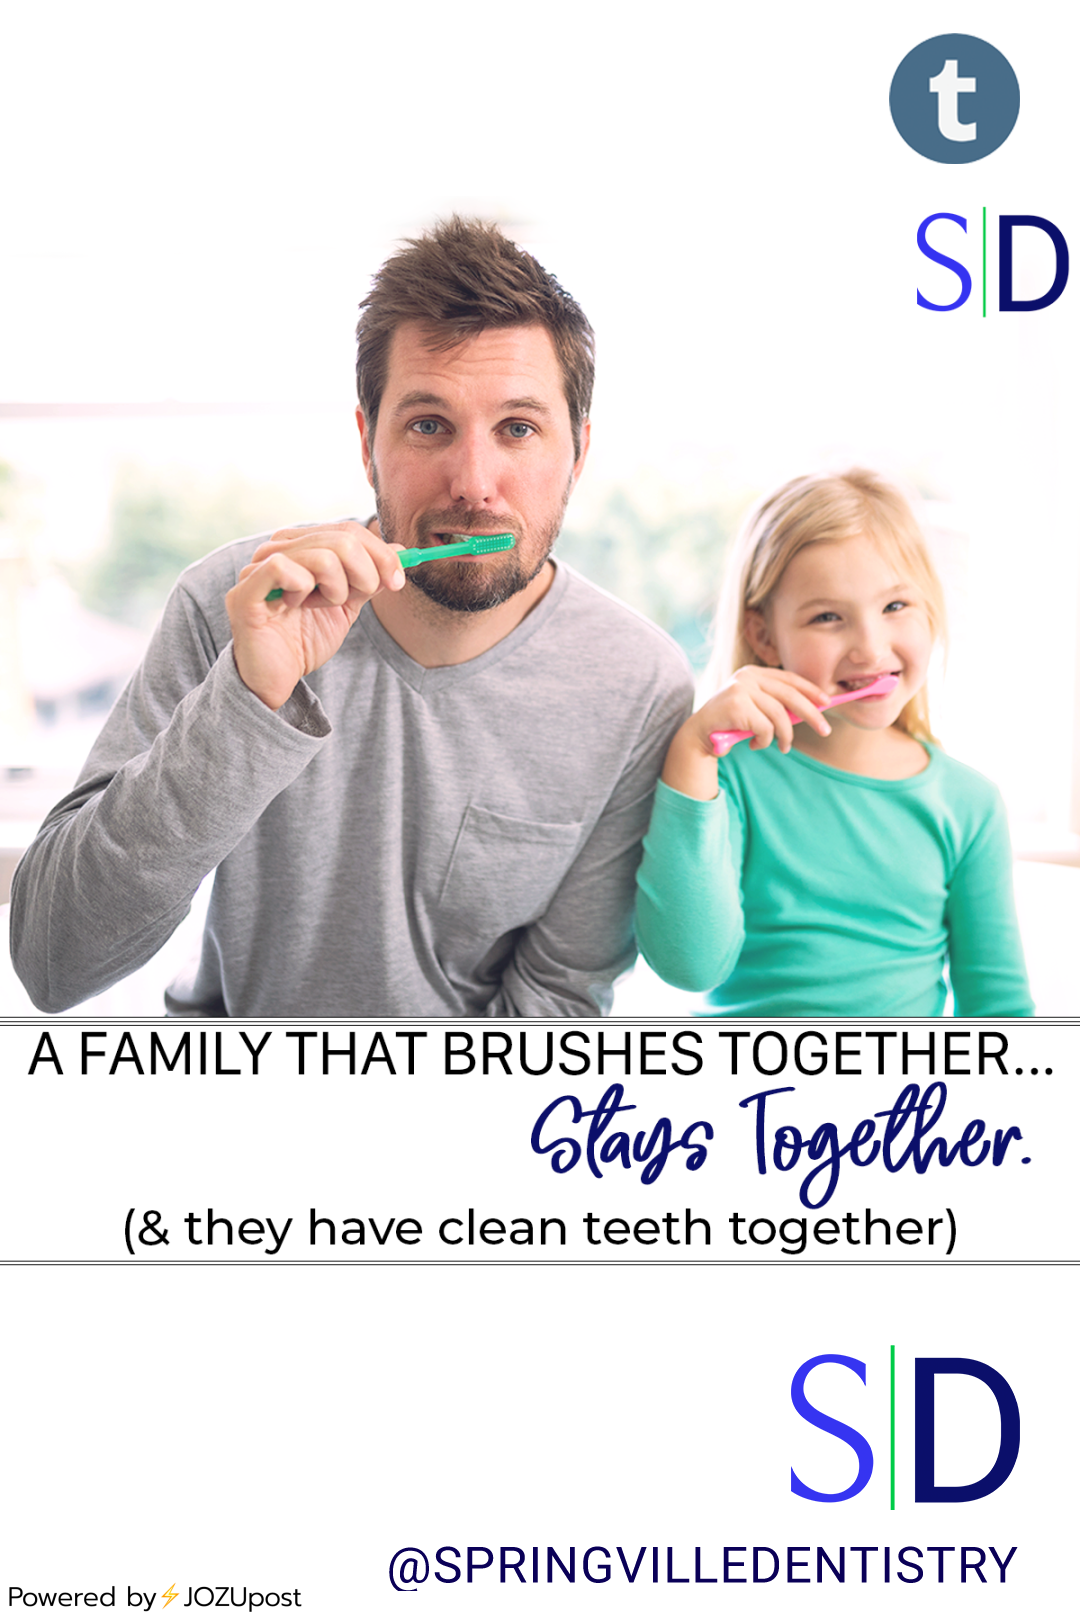 Working together as a team is an excellent way to promote good oral hygiene habits and ensure the whole family enjoys healthy teeth and gums. Here are some practical suggestions to get started:
Brush and floss together: Set aside some time each...